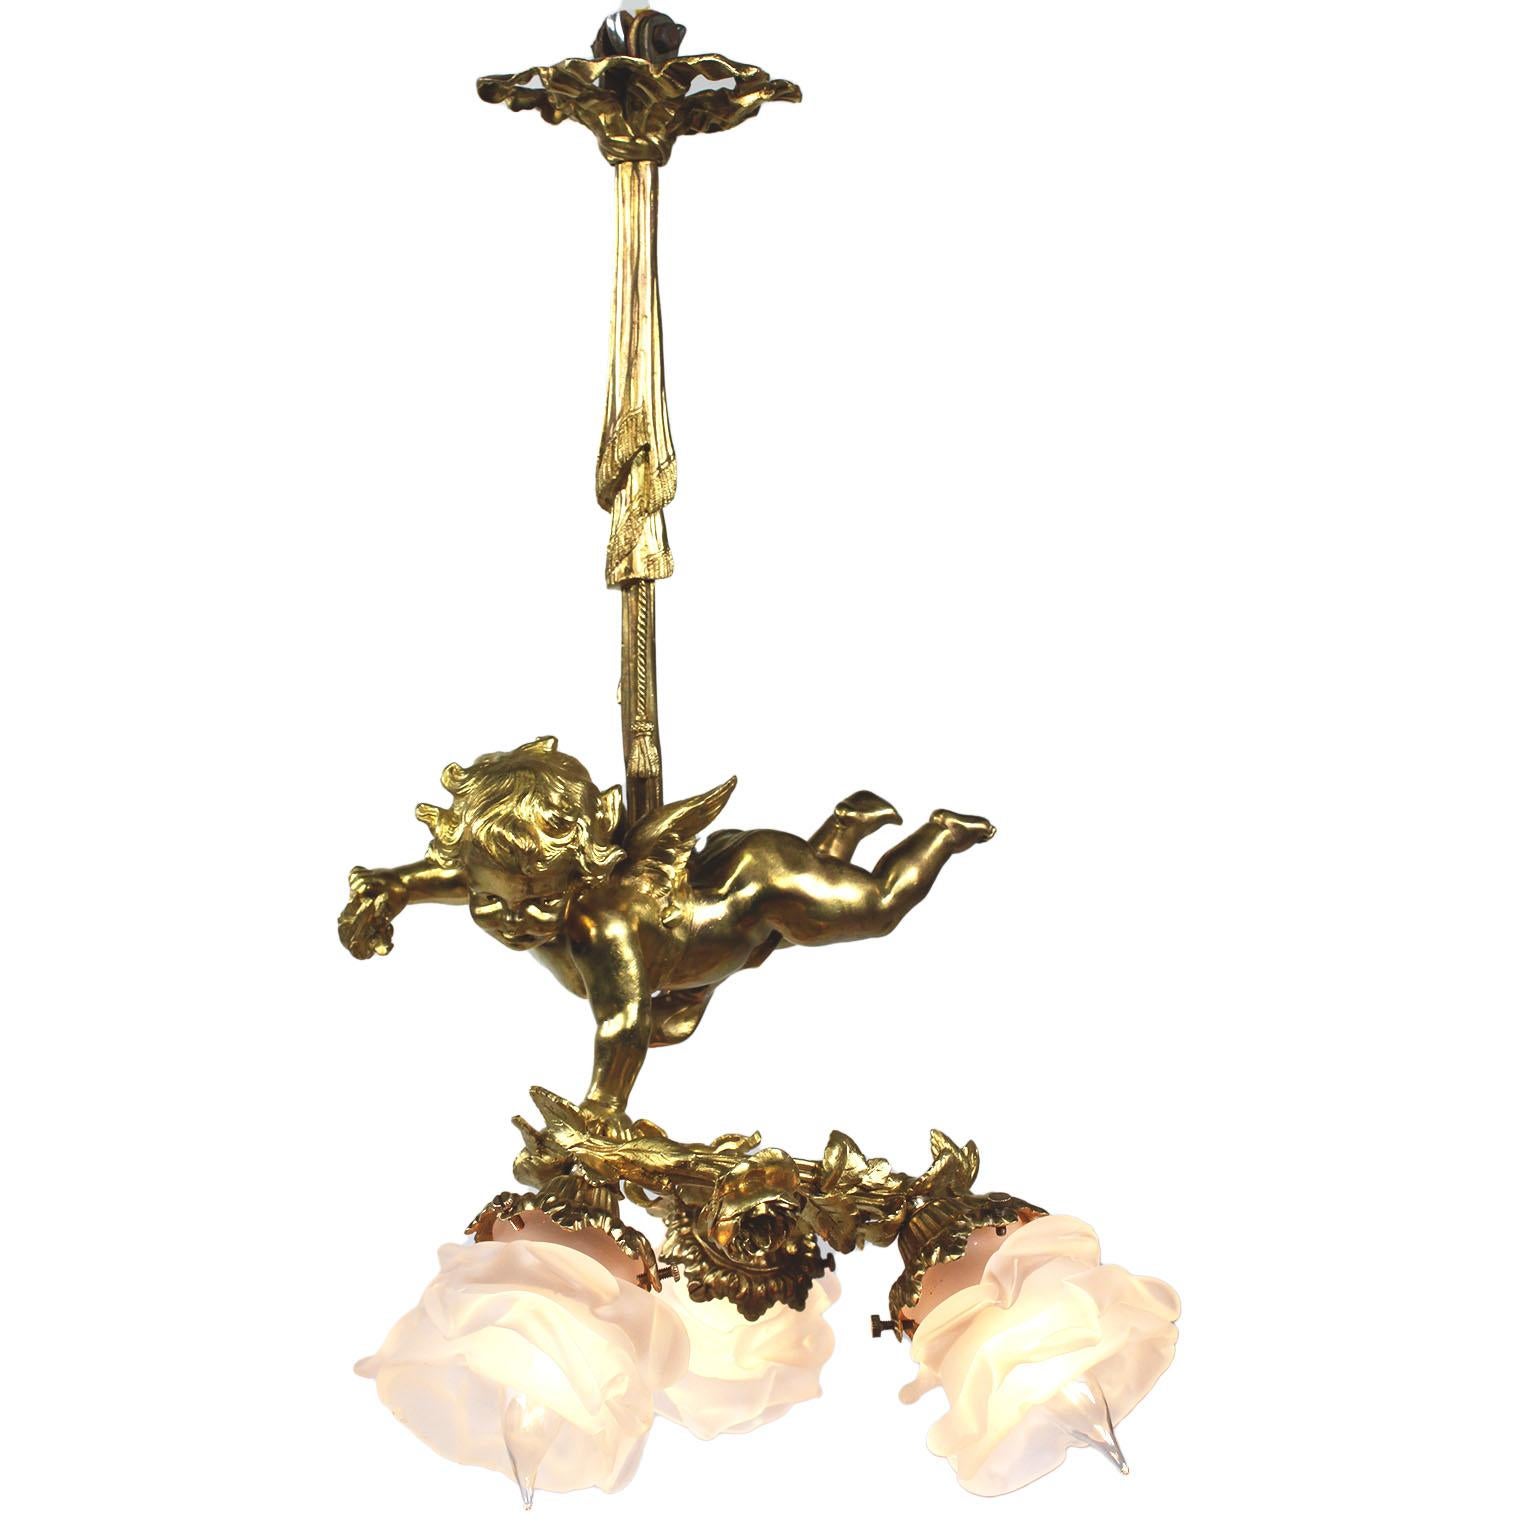 A fine and charming whimsical French 19th/20th century belle époque three light gilt bronze figural chandelier pendant. The charming gilt bronze figure of a naked hovering winged cherub or cupid, suspended from a ribbon-tied tassel wrapped around